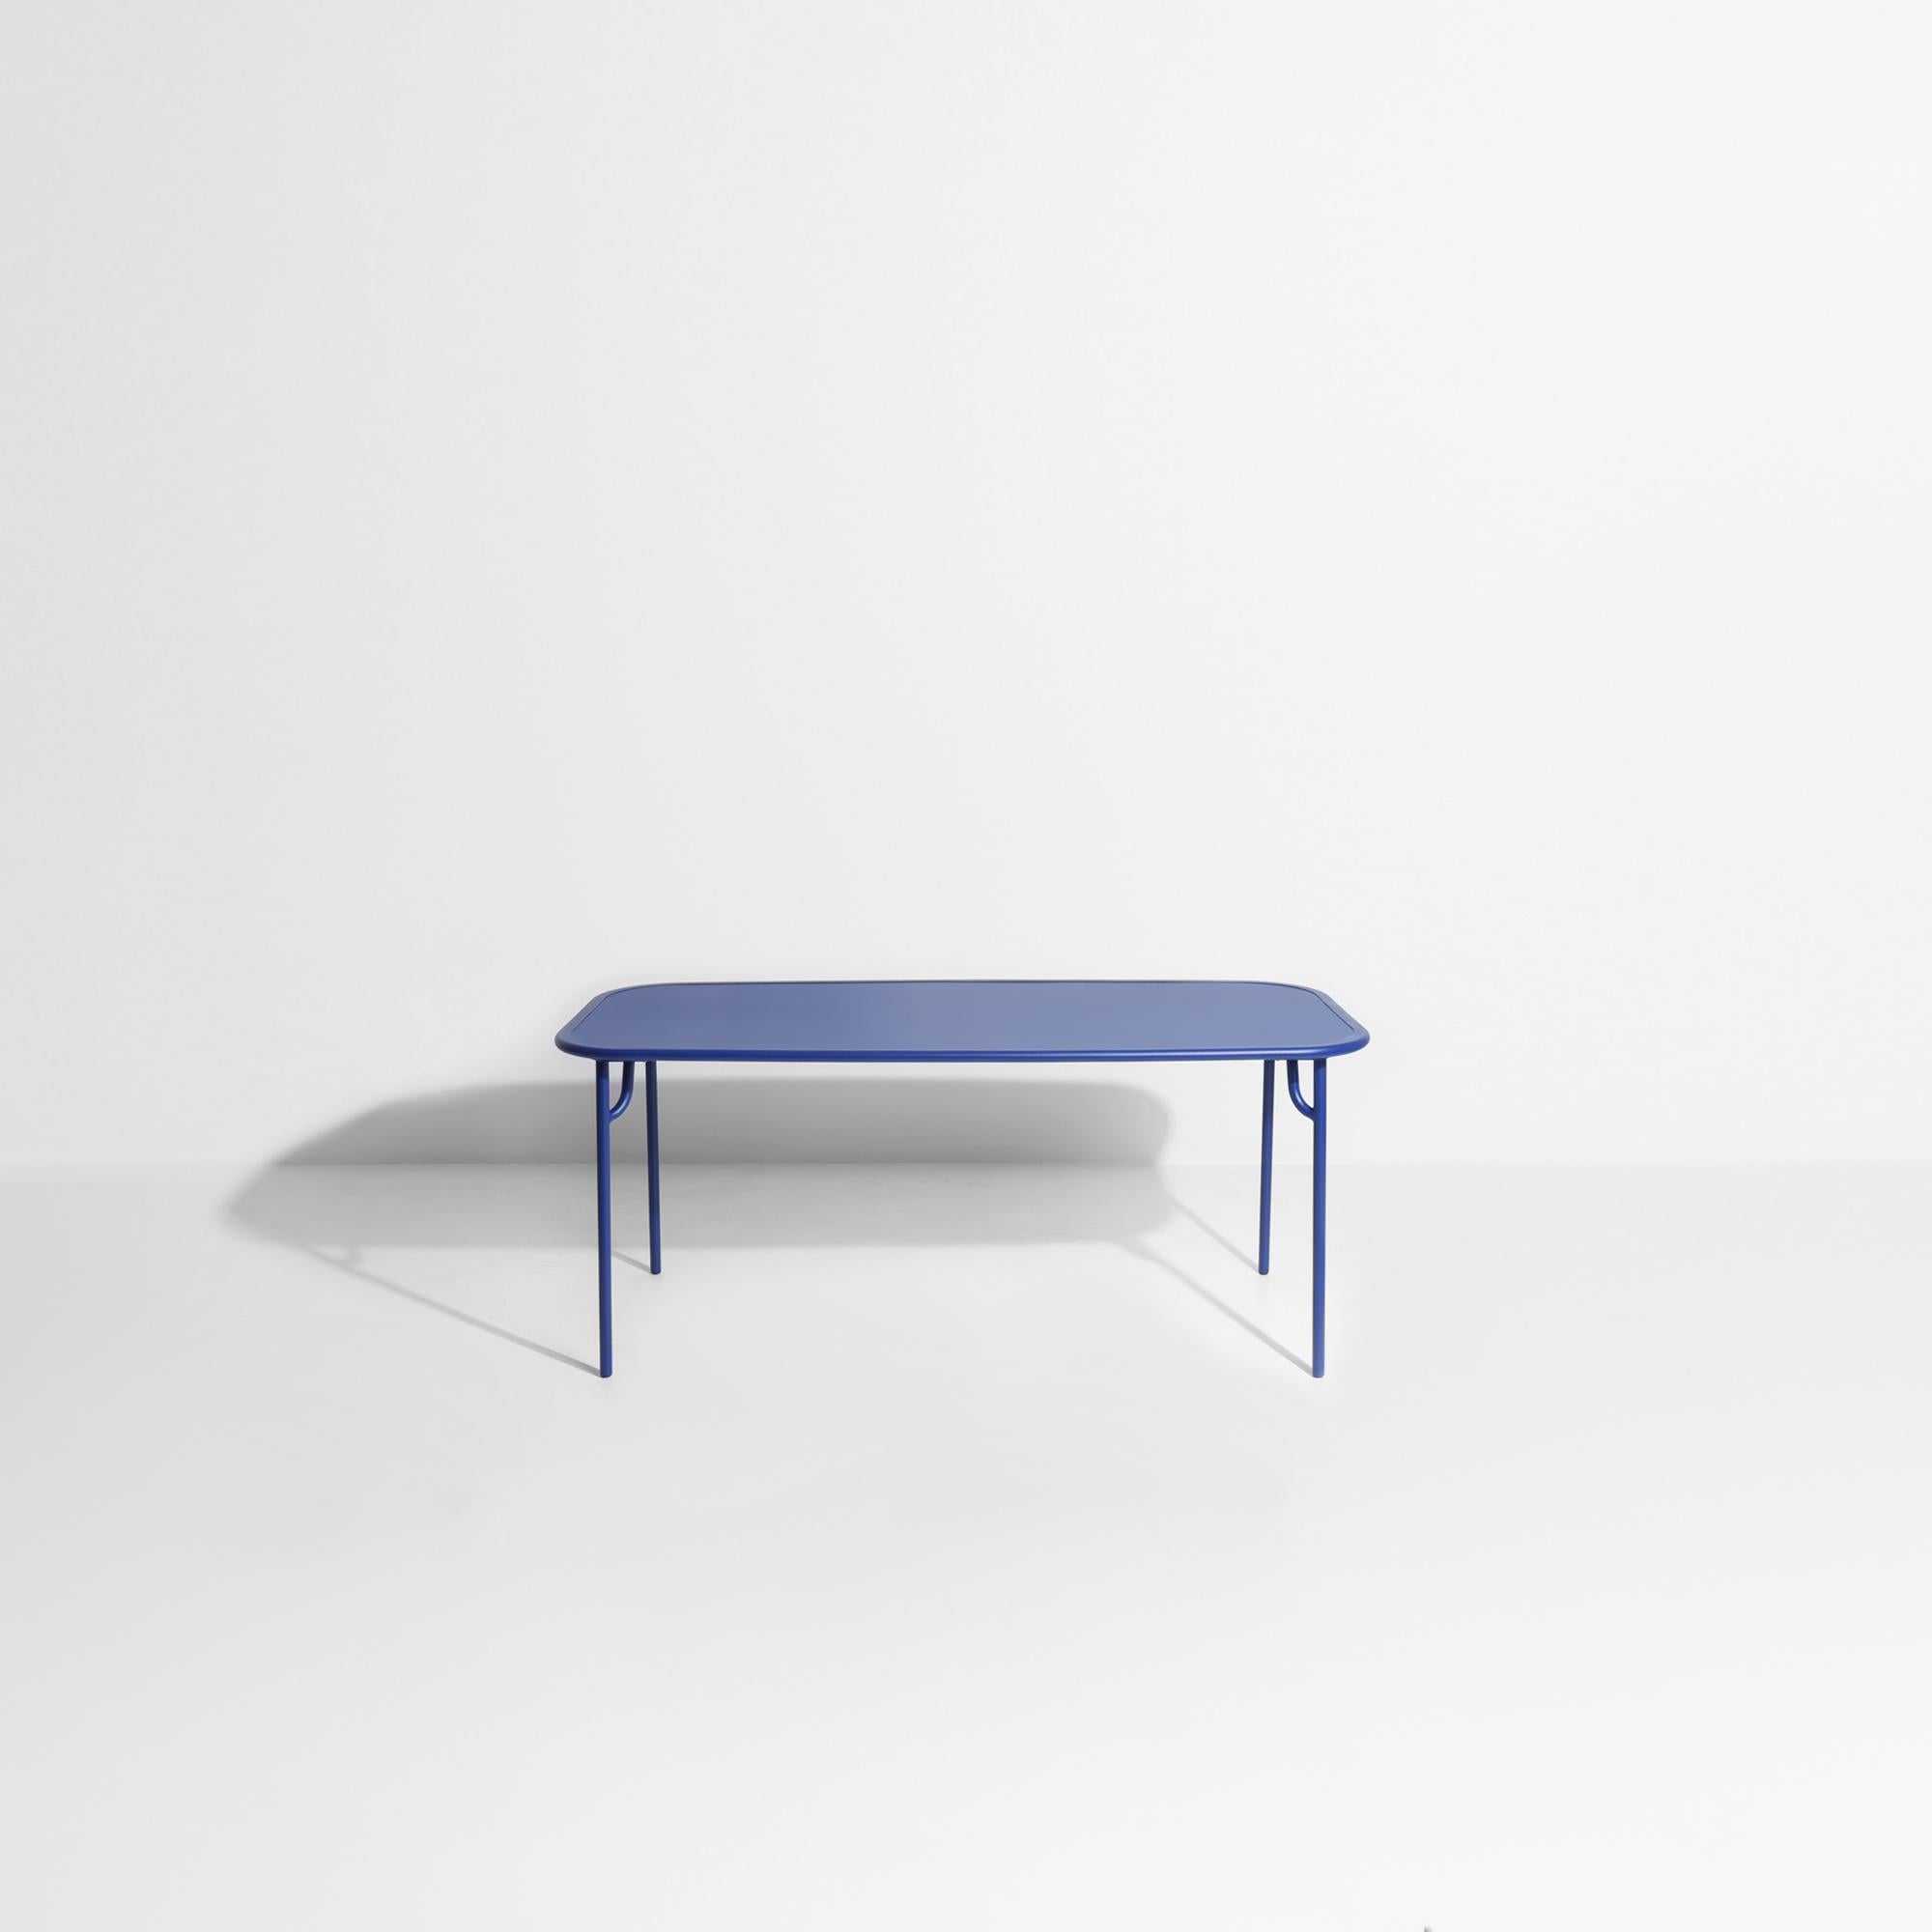 Petite Friture Week-End Medium Plain Rectangular Dining Table in Blue Aluminium In New Condition For Sale In Brooklyn, NY